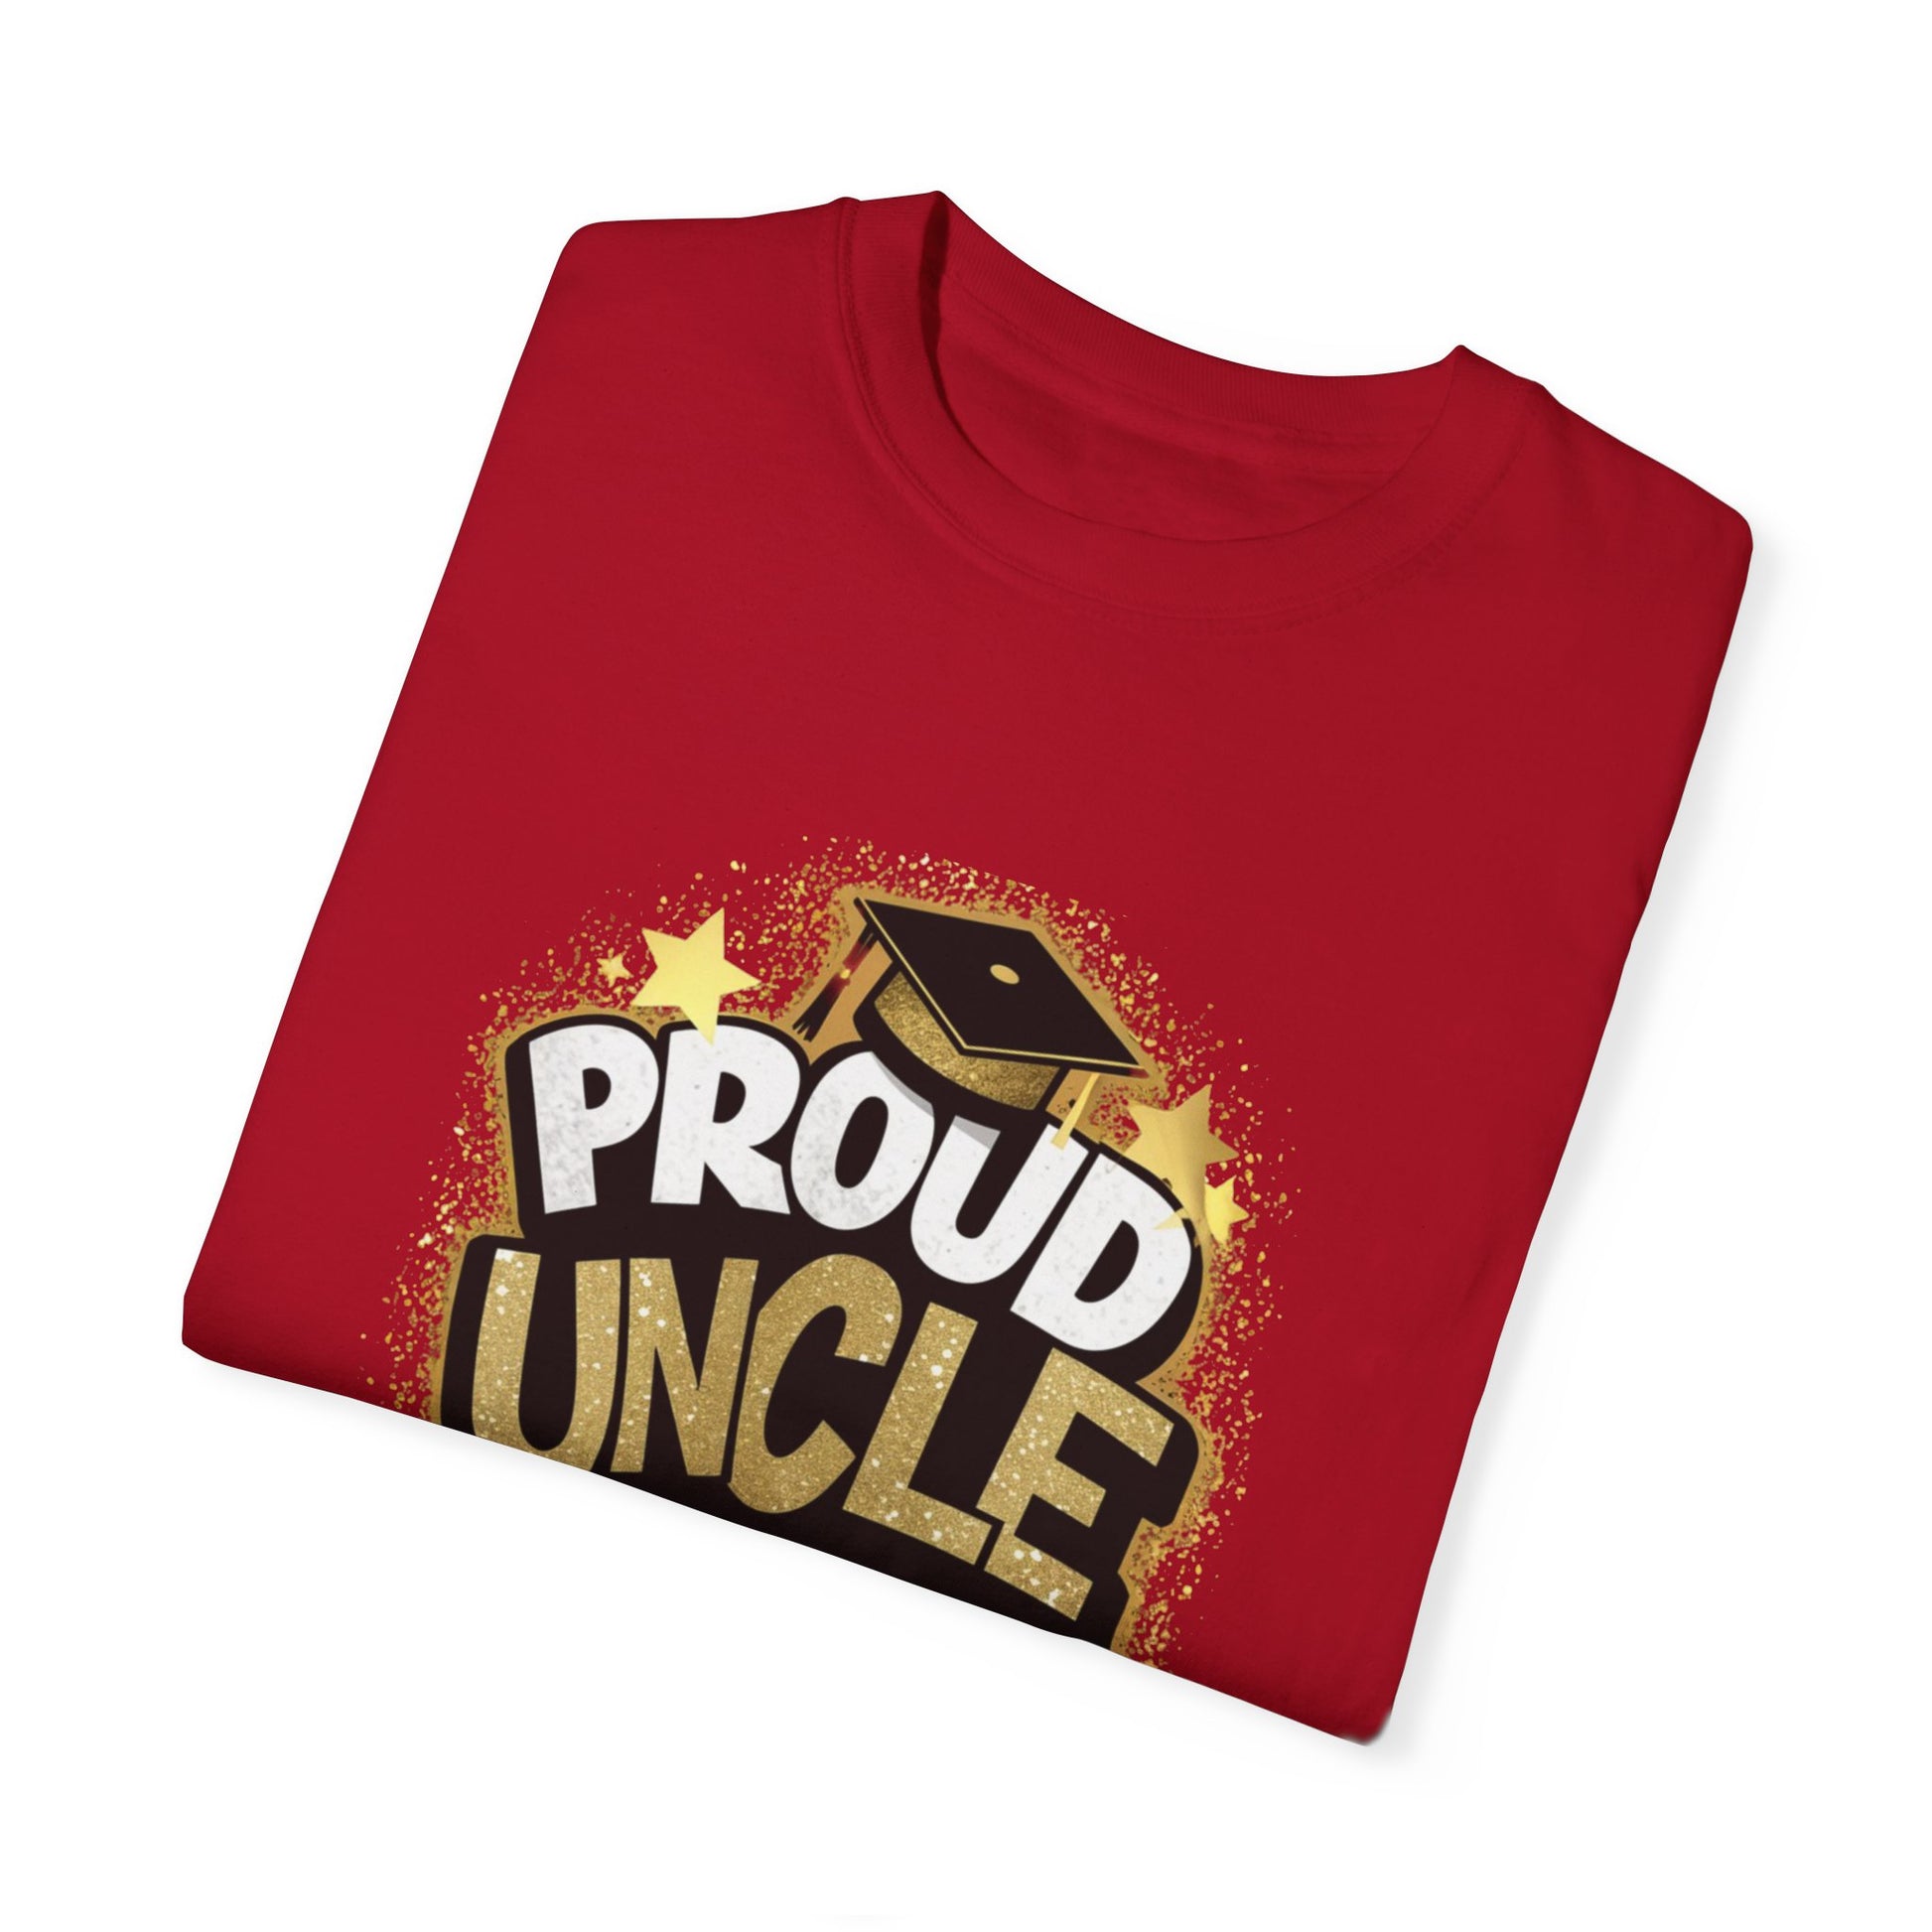 Proud Uncle of a 2024 Graduate Unisex Garment-dyed T-shirt Cotton Funny Humorous Graphic Soft Premium Unisex Men Women Red T-shirt Birthday Gift-20